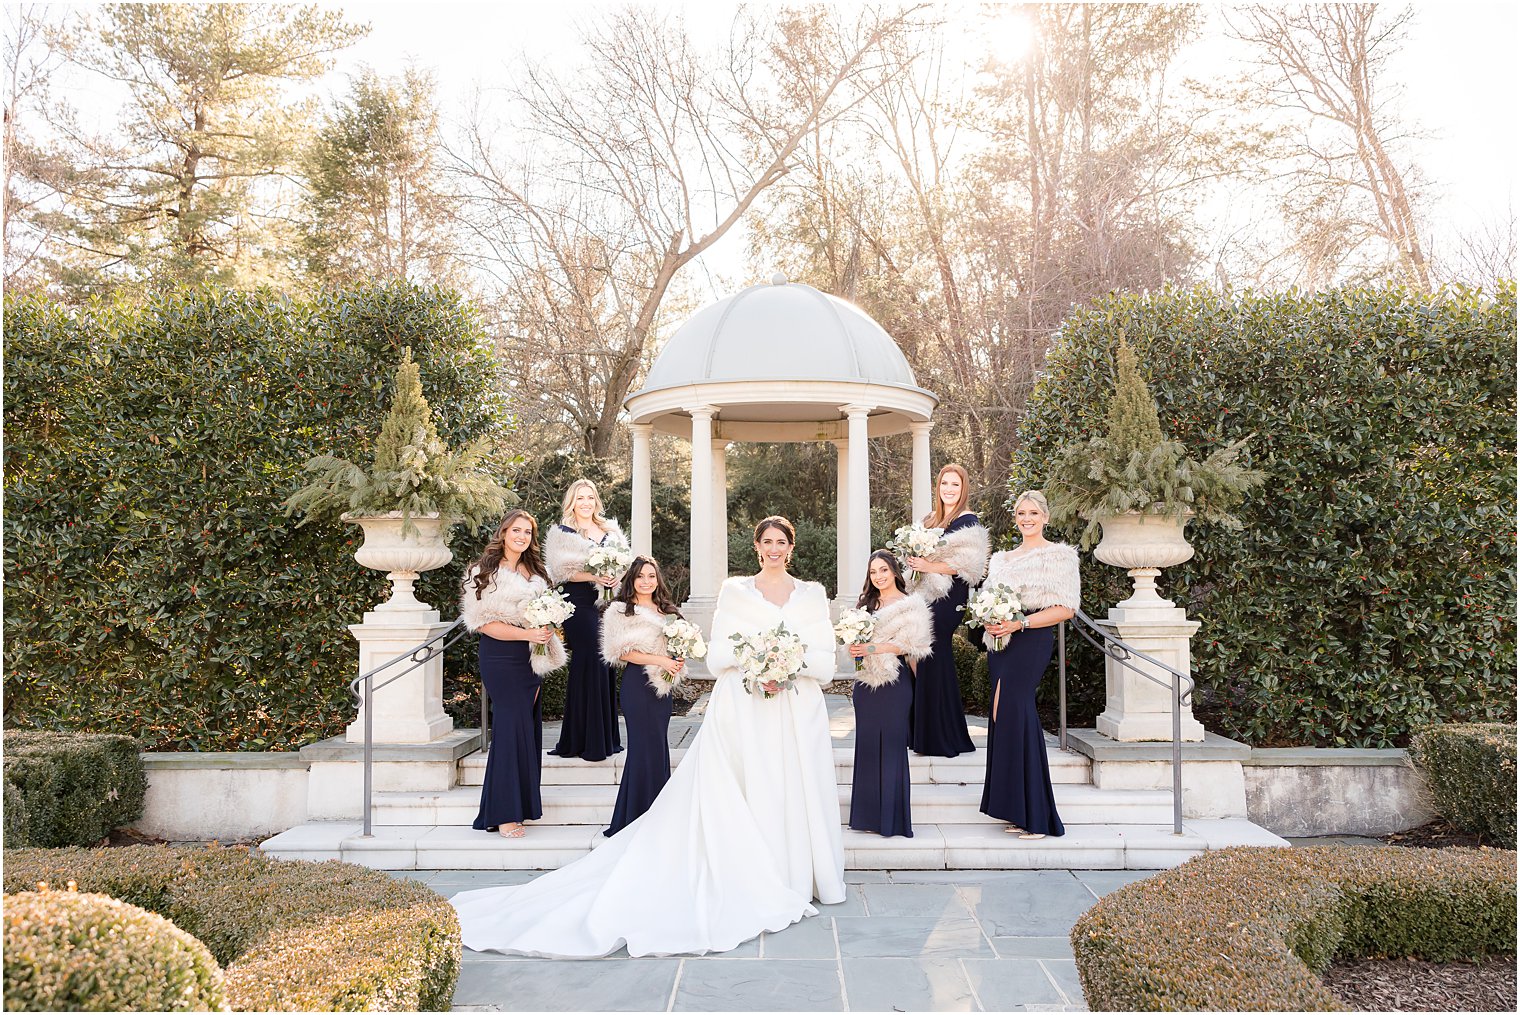 bride stands with bridesmaids in blue dresses with furs by gazebo at Park Chateau Estate